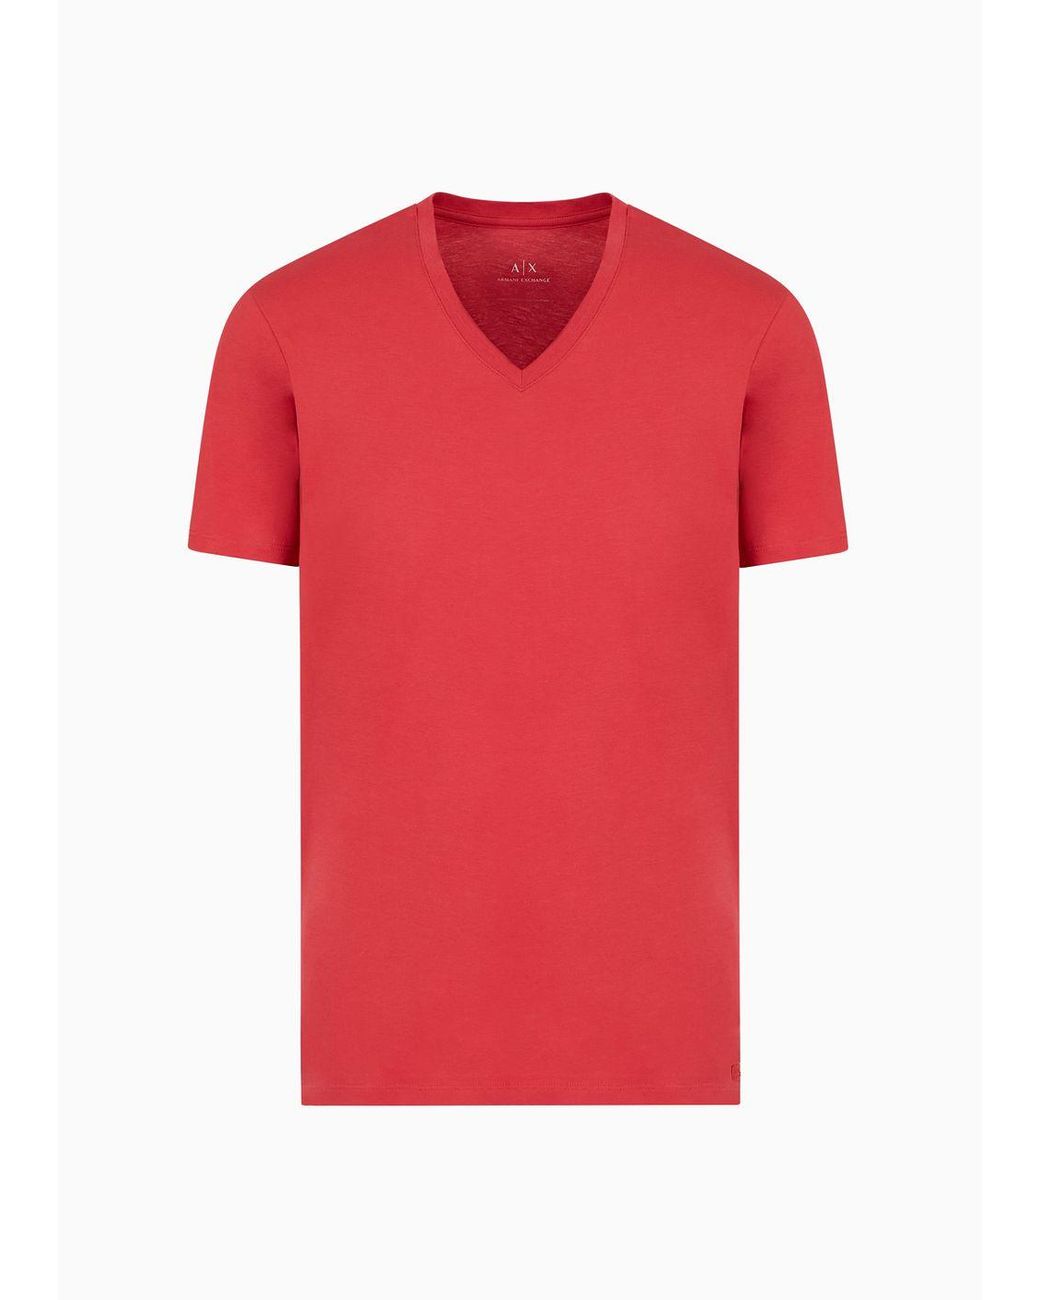 Armani Exchange Regular Fit Jersey T-shirt in Red for Men